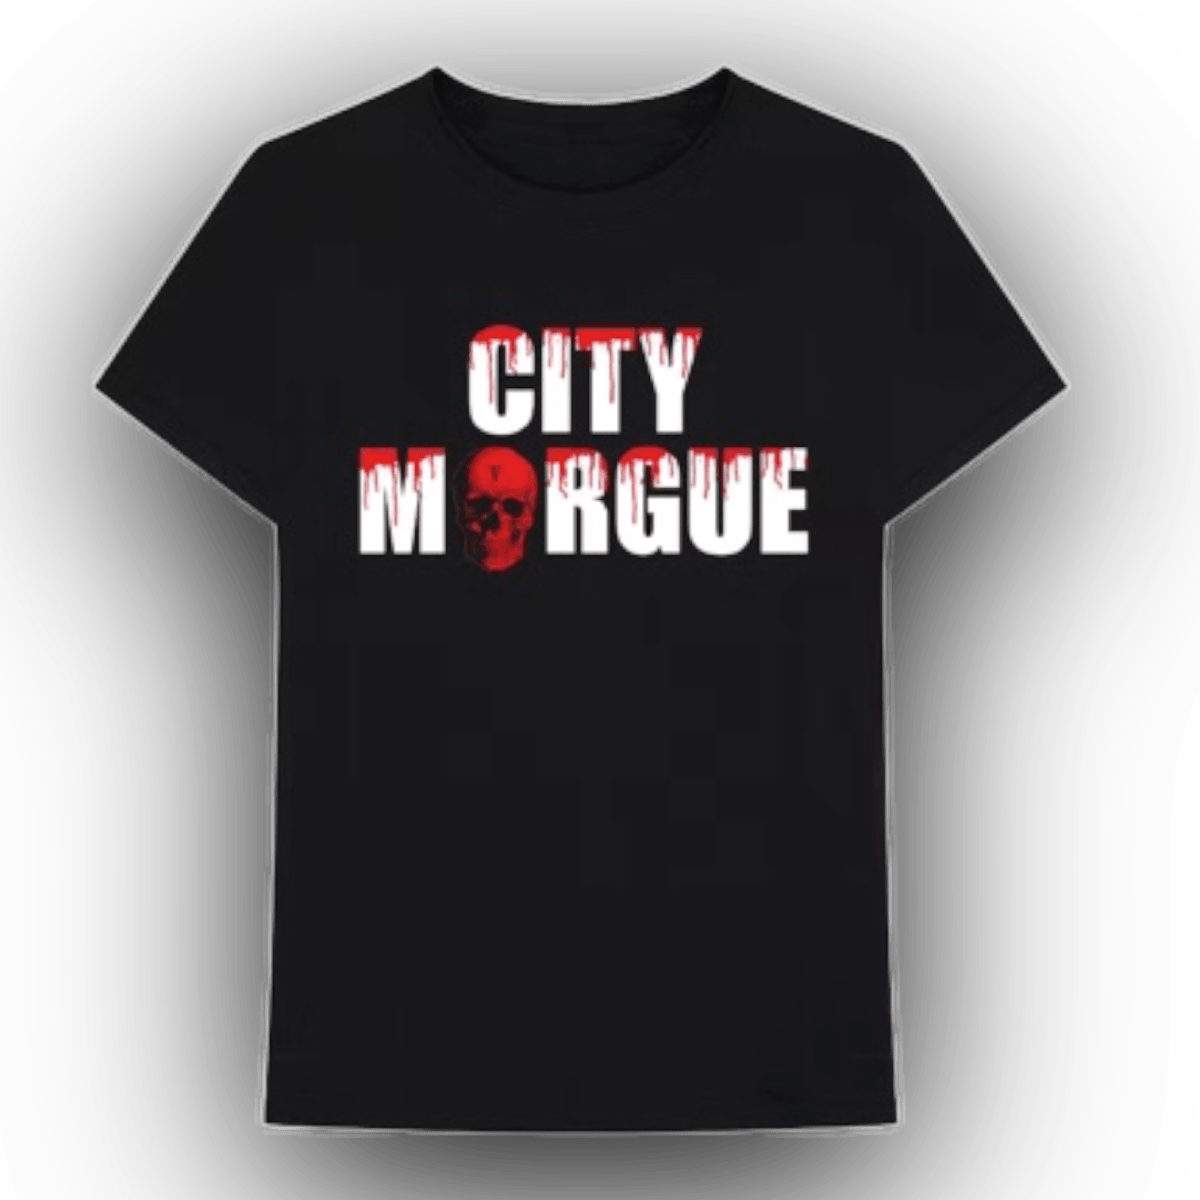 City Morgue x Vlone Dogs Tee - Black - T-Shirt - Vlone - Jawns on Fire